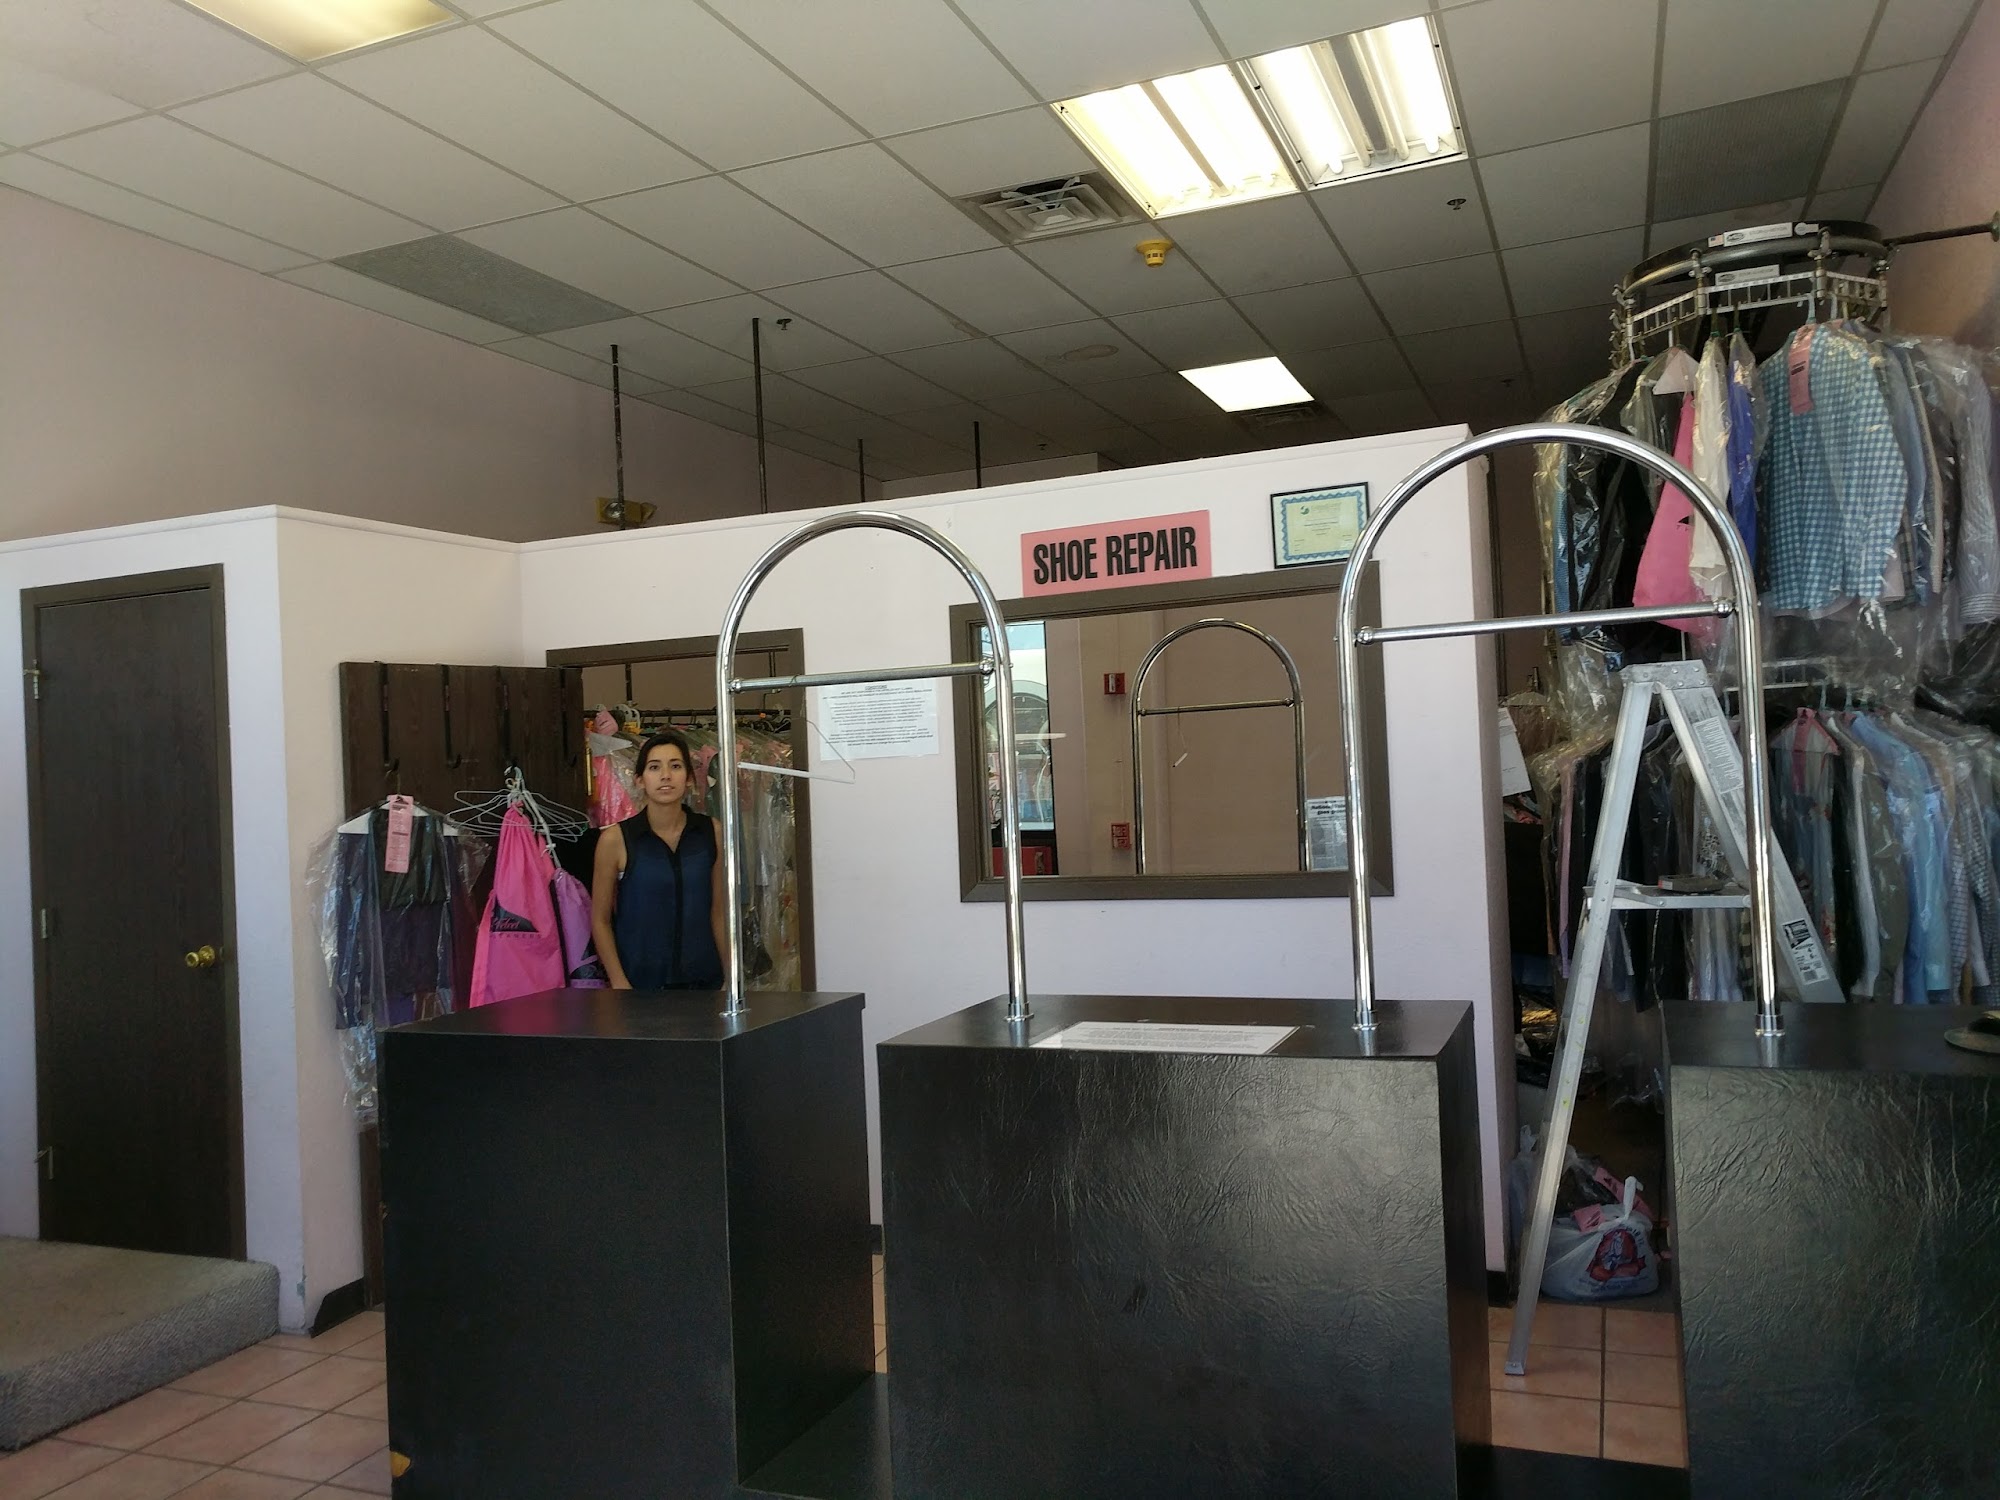 National Velvet-The Dry Cleaners 34295 US-6, Edwards Colorado 81632